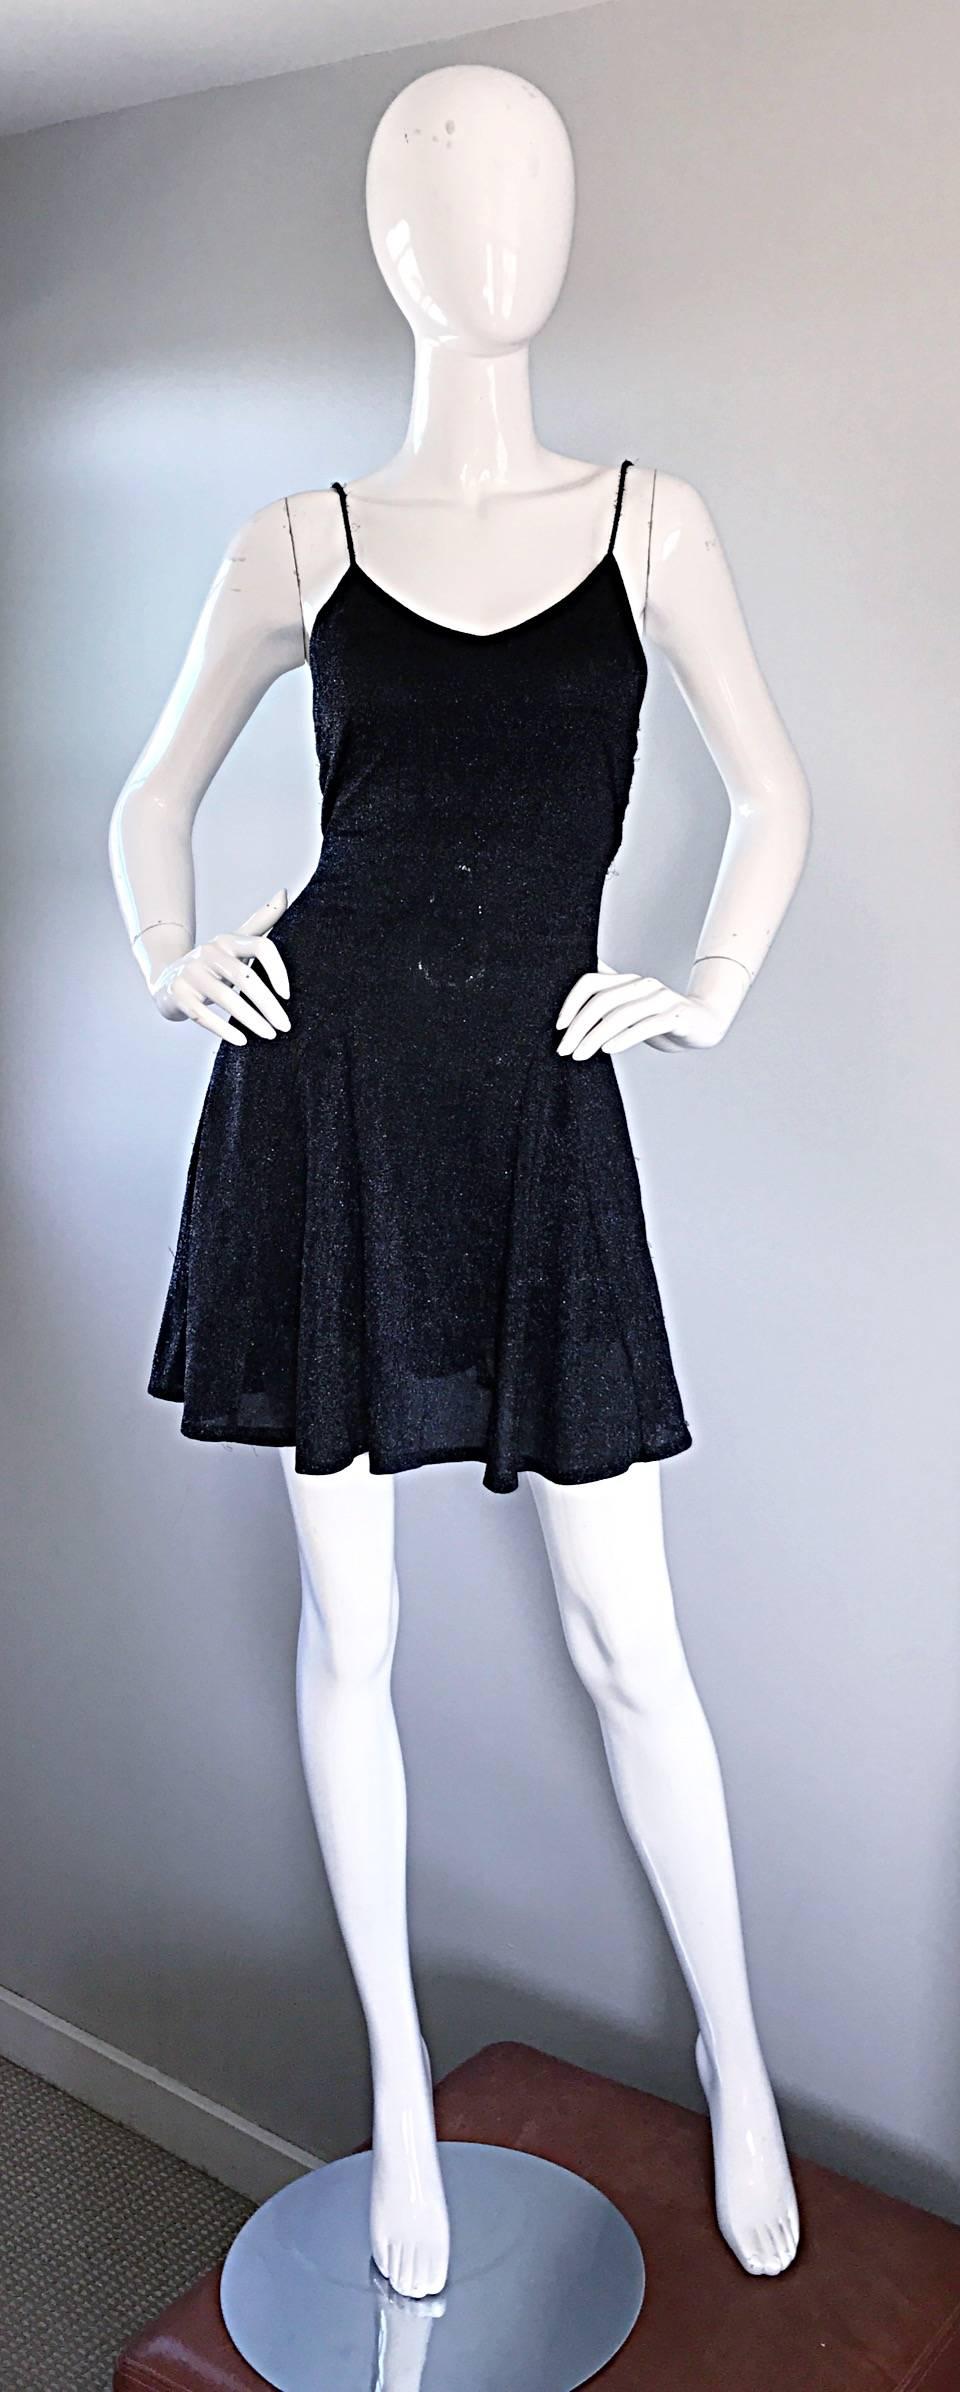 Remarkable vintage BETSEY JOHNSON black metallic Lurex skater dress! Features a black and silver metallic Lurex. Body hugging bodice, with a flared skater skirt. So, 